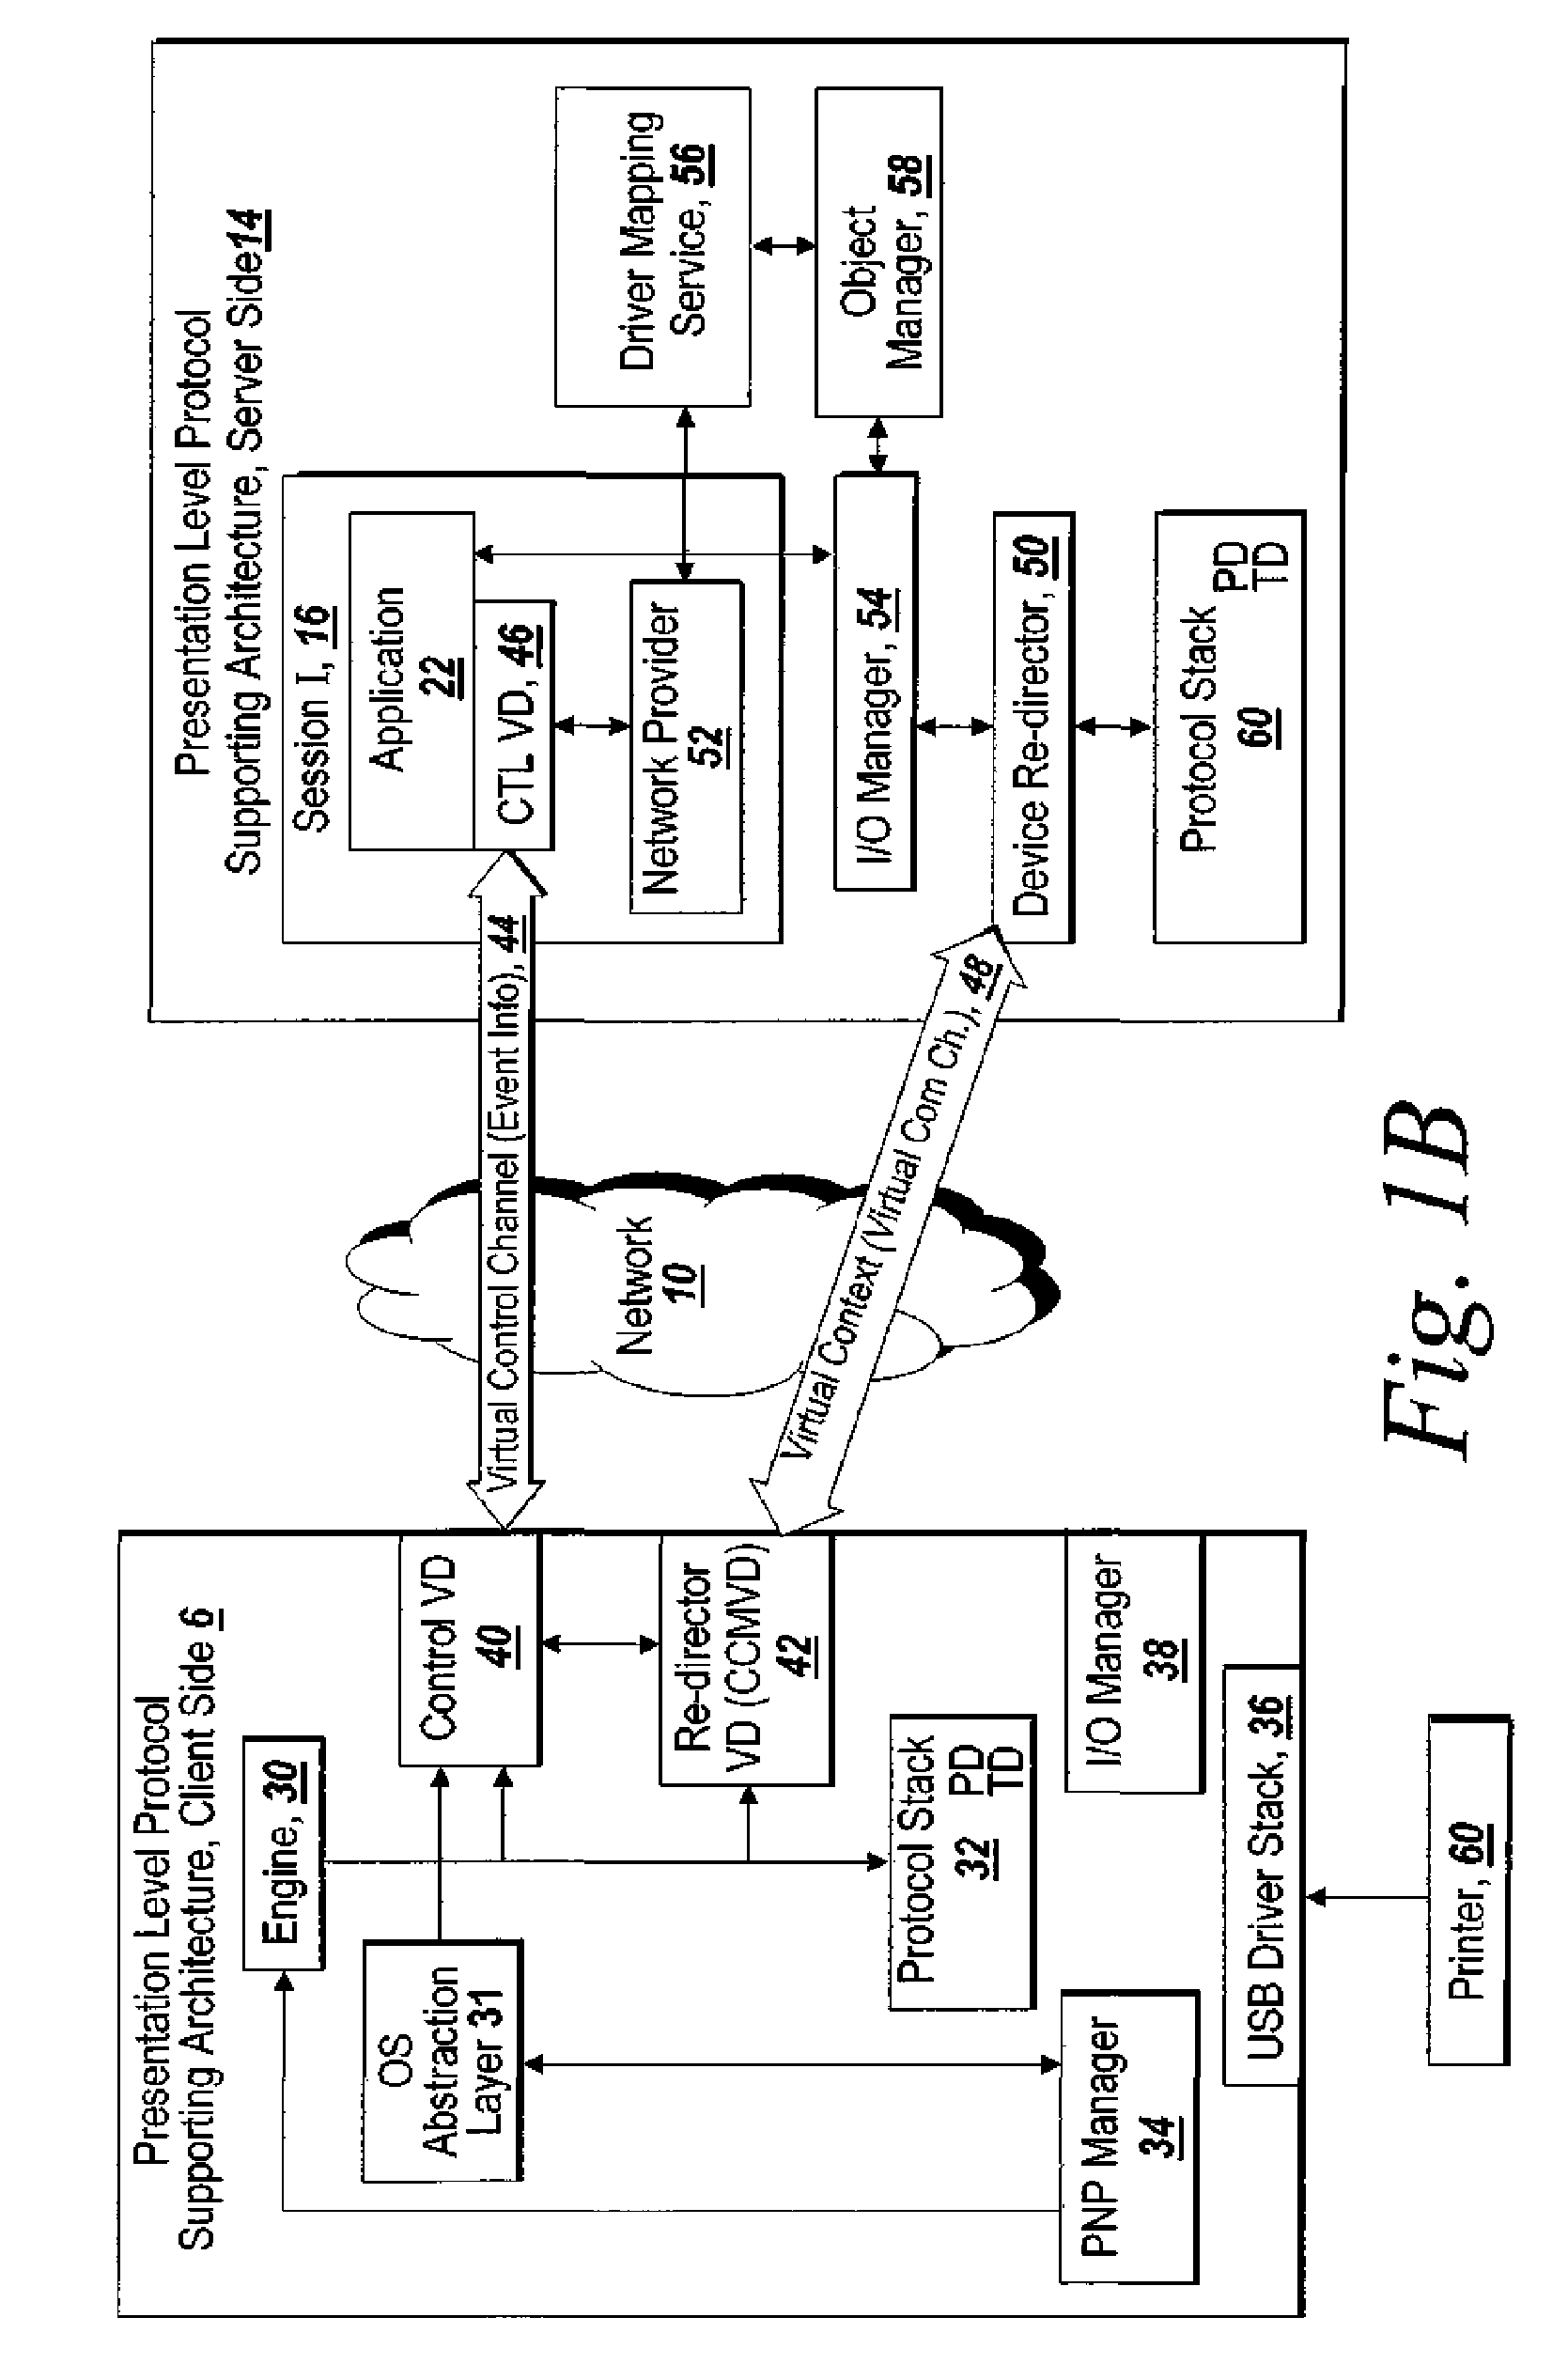 System and method for event detection and re-direction